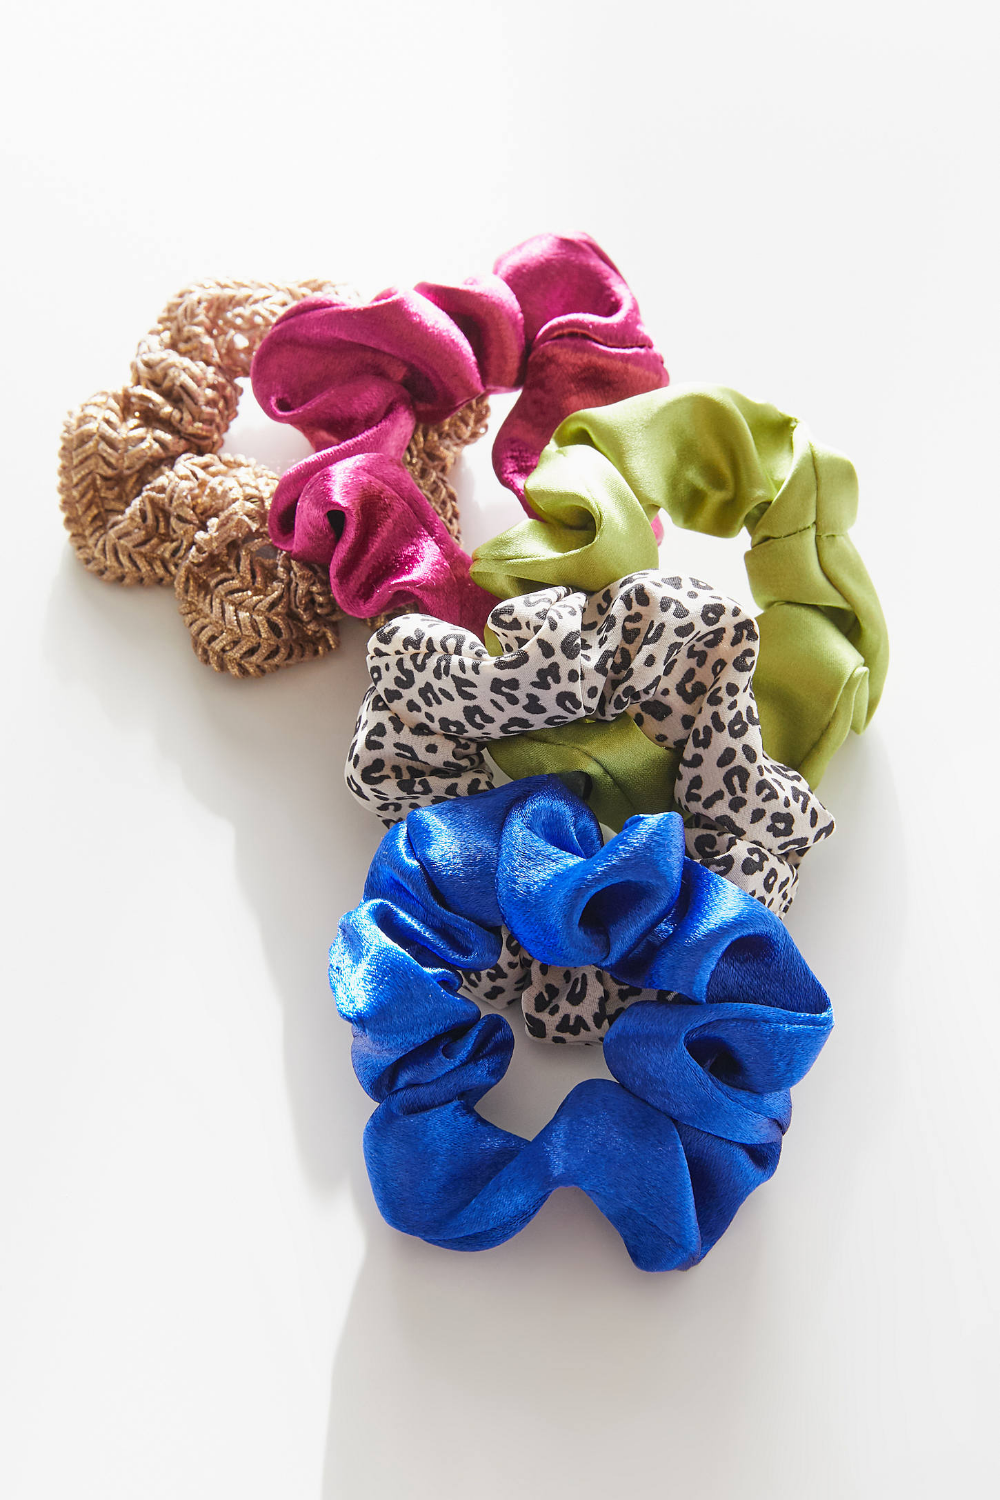 Days Of The Week Scrunchie Set - Days Of The Week Scrunchie Set -   14 beauty Day of the week ideas